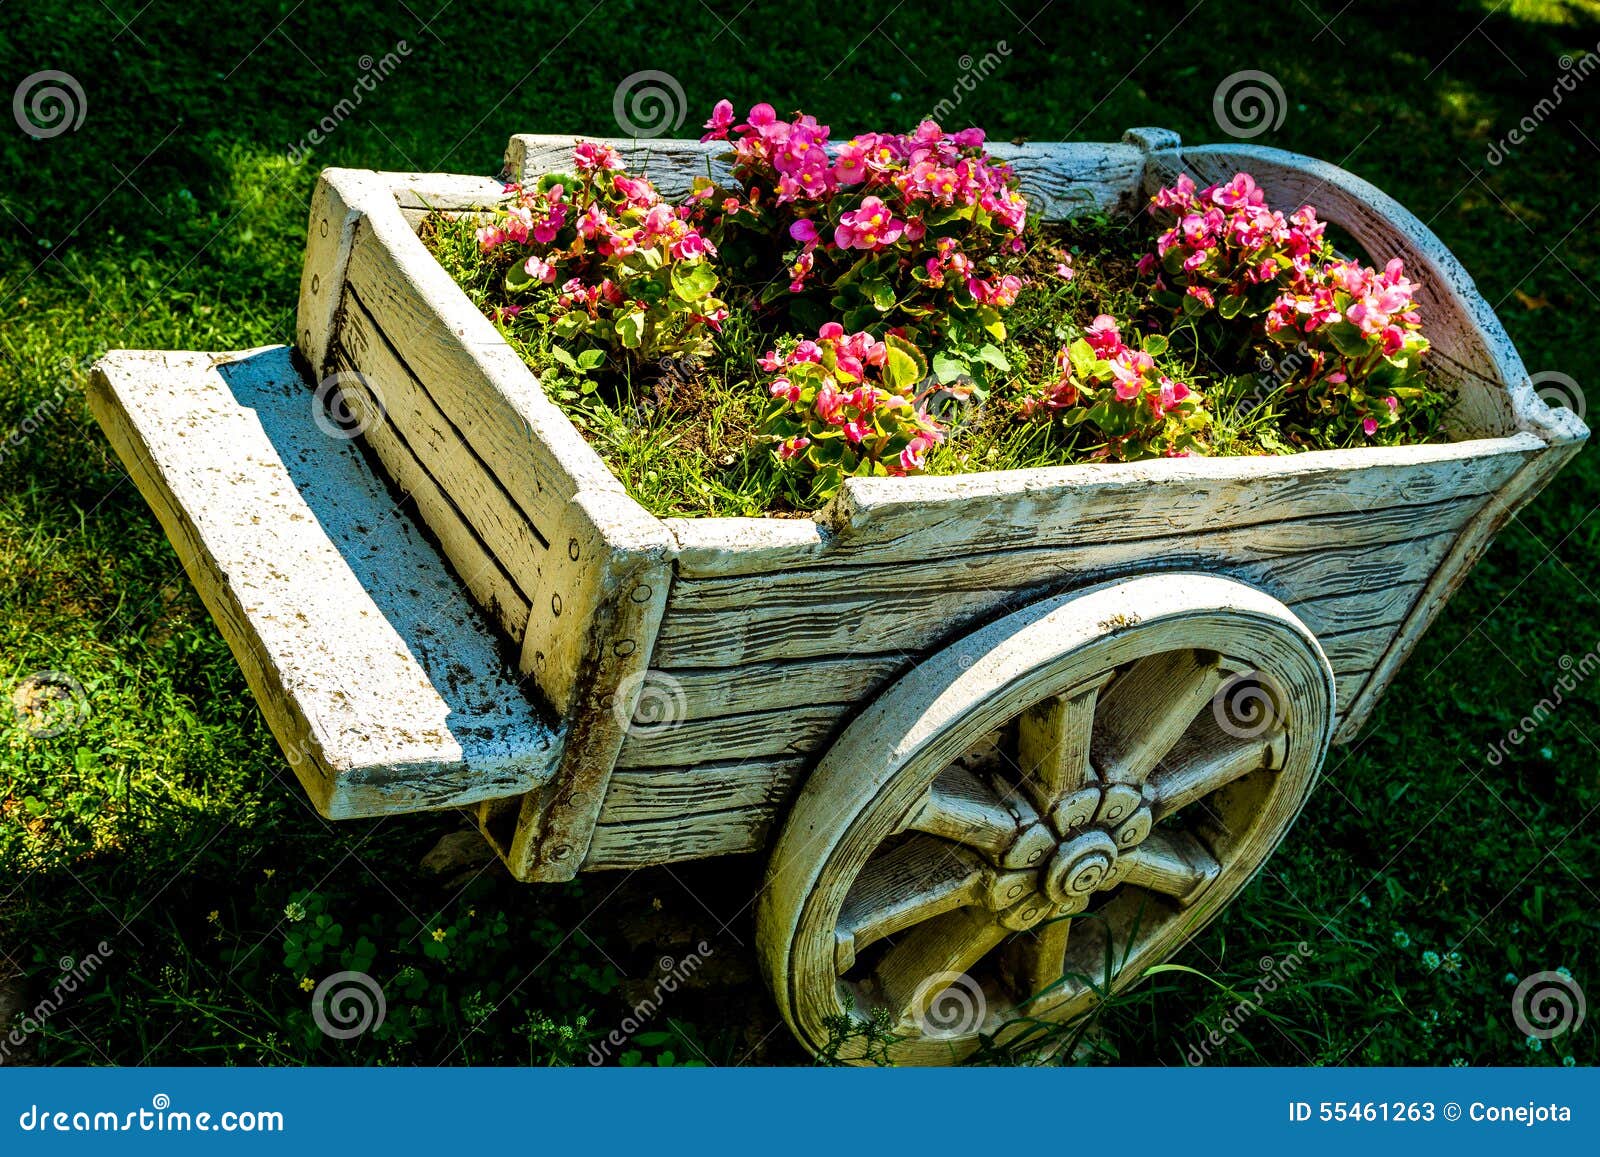 Download Wheelbarrow with flowers stock image. Image of flowers - 55461263